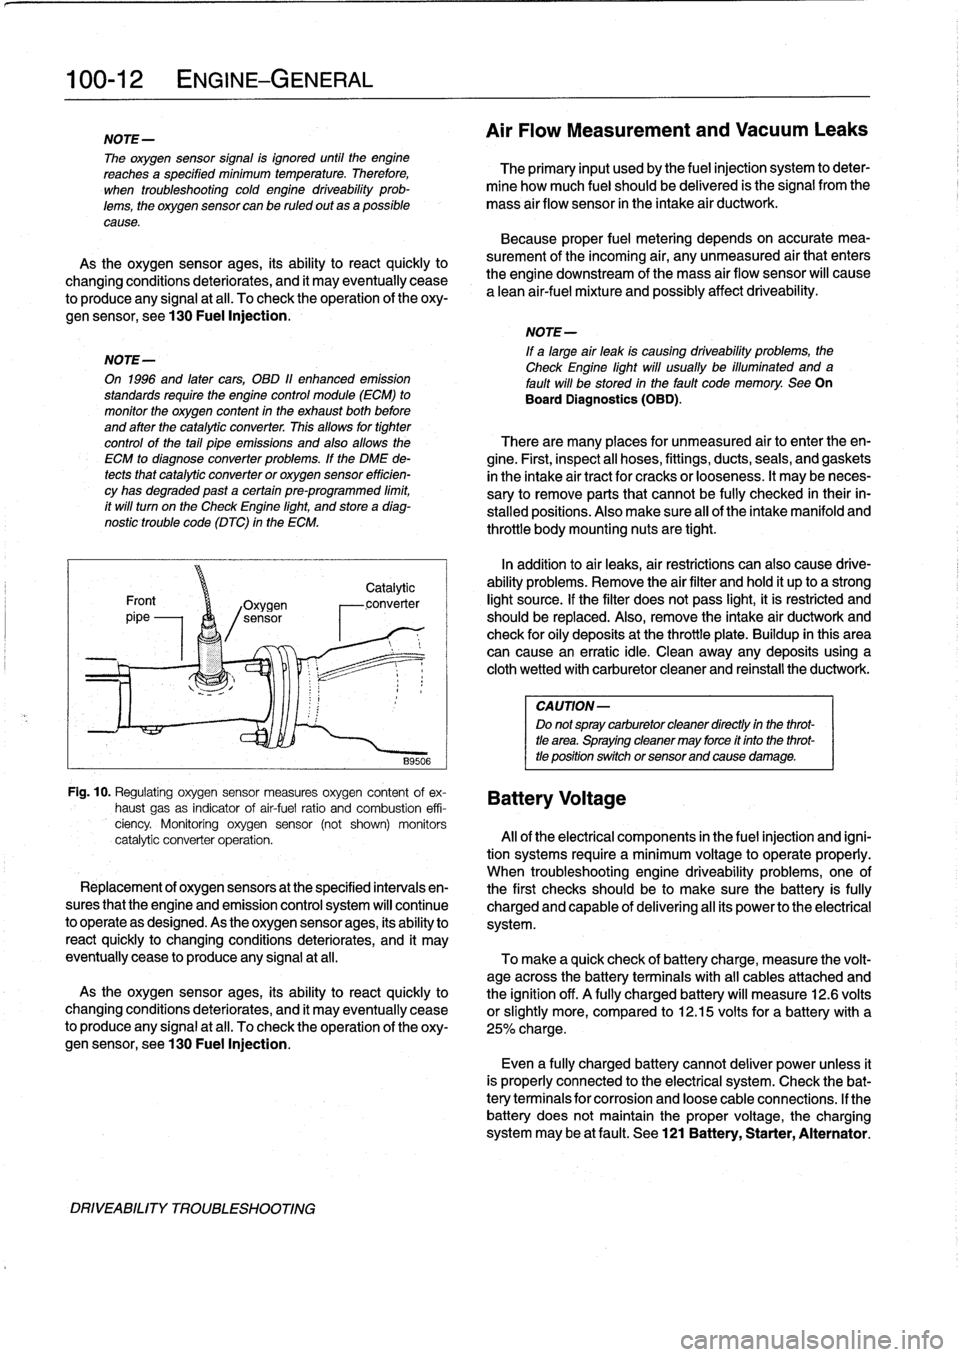 BMW 328i 1998 E36 Workshop Manual 
100-
1
2
ENGINE-GENERAL

NOTE-

The
oxygen
sensor
signal
is
ignored
until
the
engine
reachesa
specified
minimum
temperature
.
Therefore,

	

The
primary
input
usedby
the
fuel
injection
system
to
dete